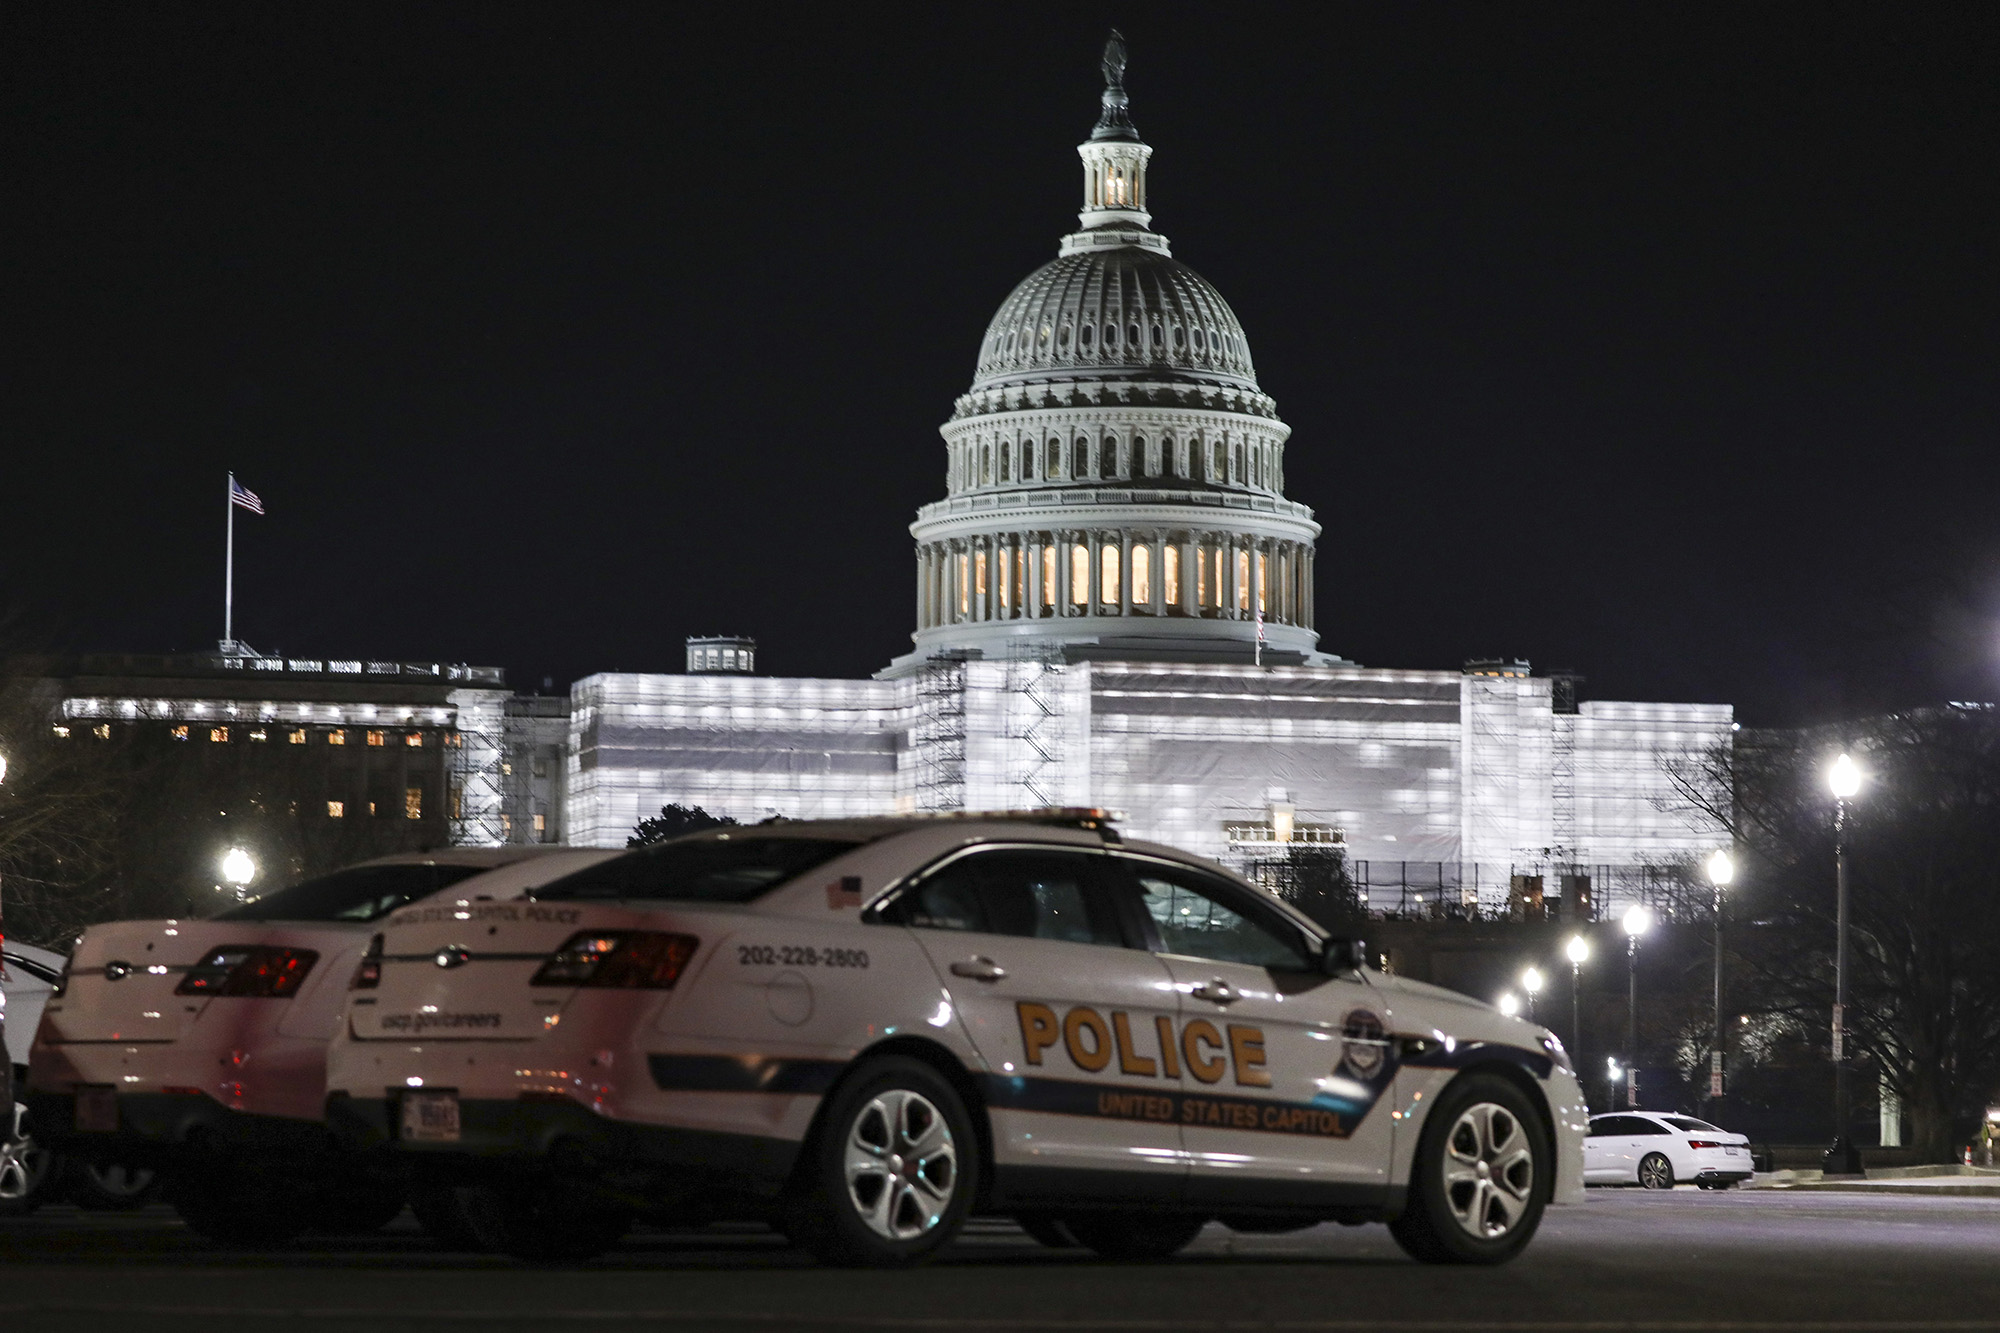 Security forces take measures around United States Capitol ahead of the official visit of Ukrainian President Volodymyr Zelensky to Washington D.C., on December 21.